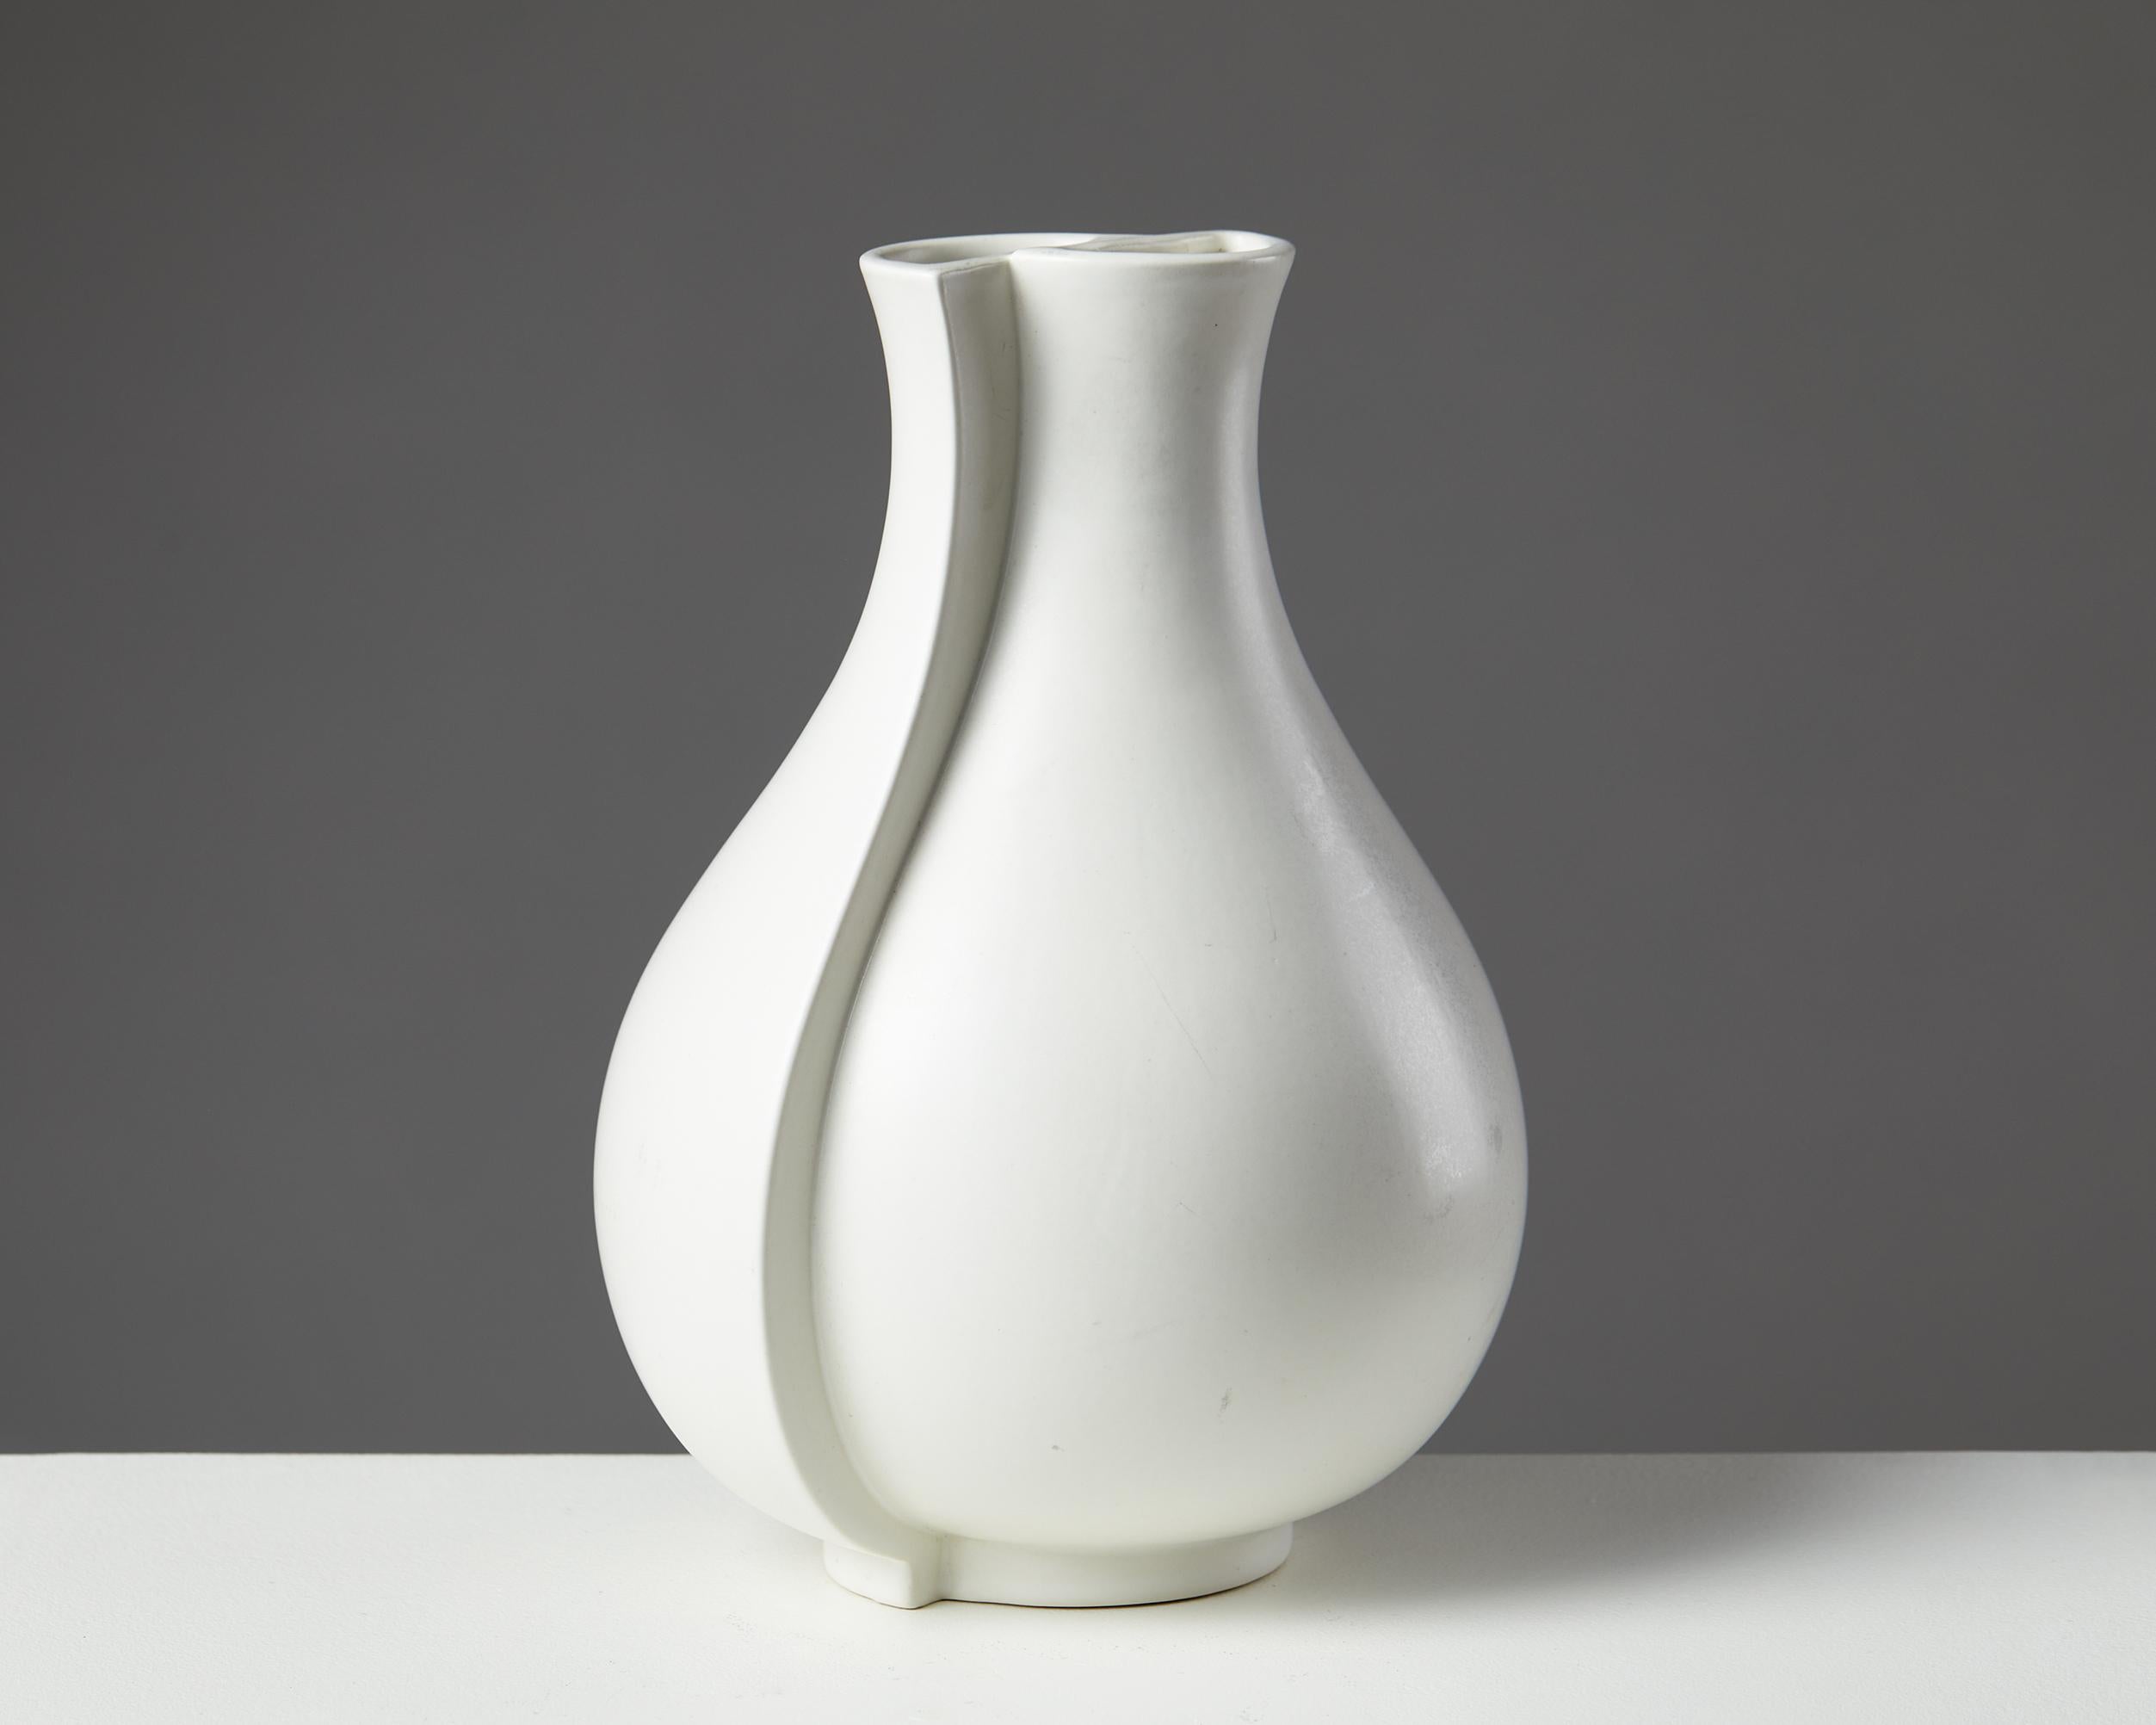 Vase “Surrea” designed by Wilhem Kåge for Gustavsberg,
Sweden, 1950's

Stoneware.

Provenance - Family with connections to the Gustavsberg's pottery.

Dimensions:
H: 22.5 cm / 8 ¾’’
W: 16 cm / 6 1/4’’
D: 13.5 cm / 5 ¼’’

The ‘Surrea’ vase was made